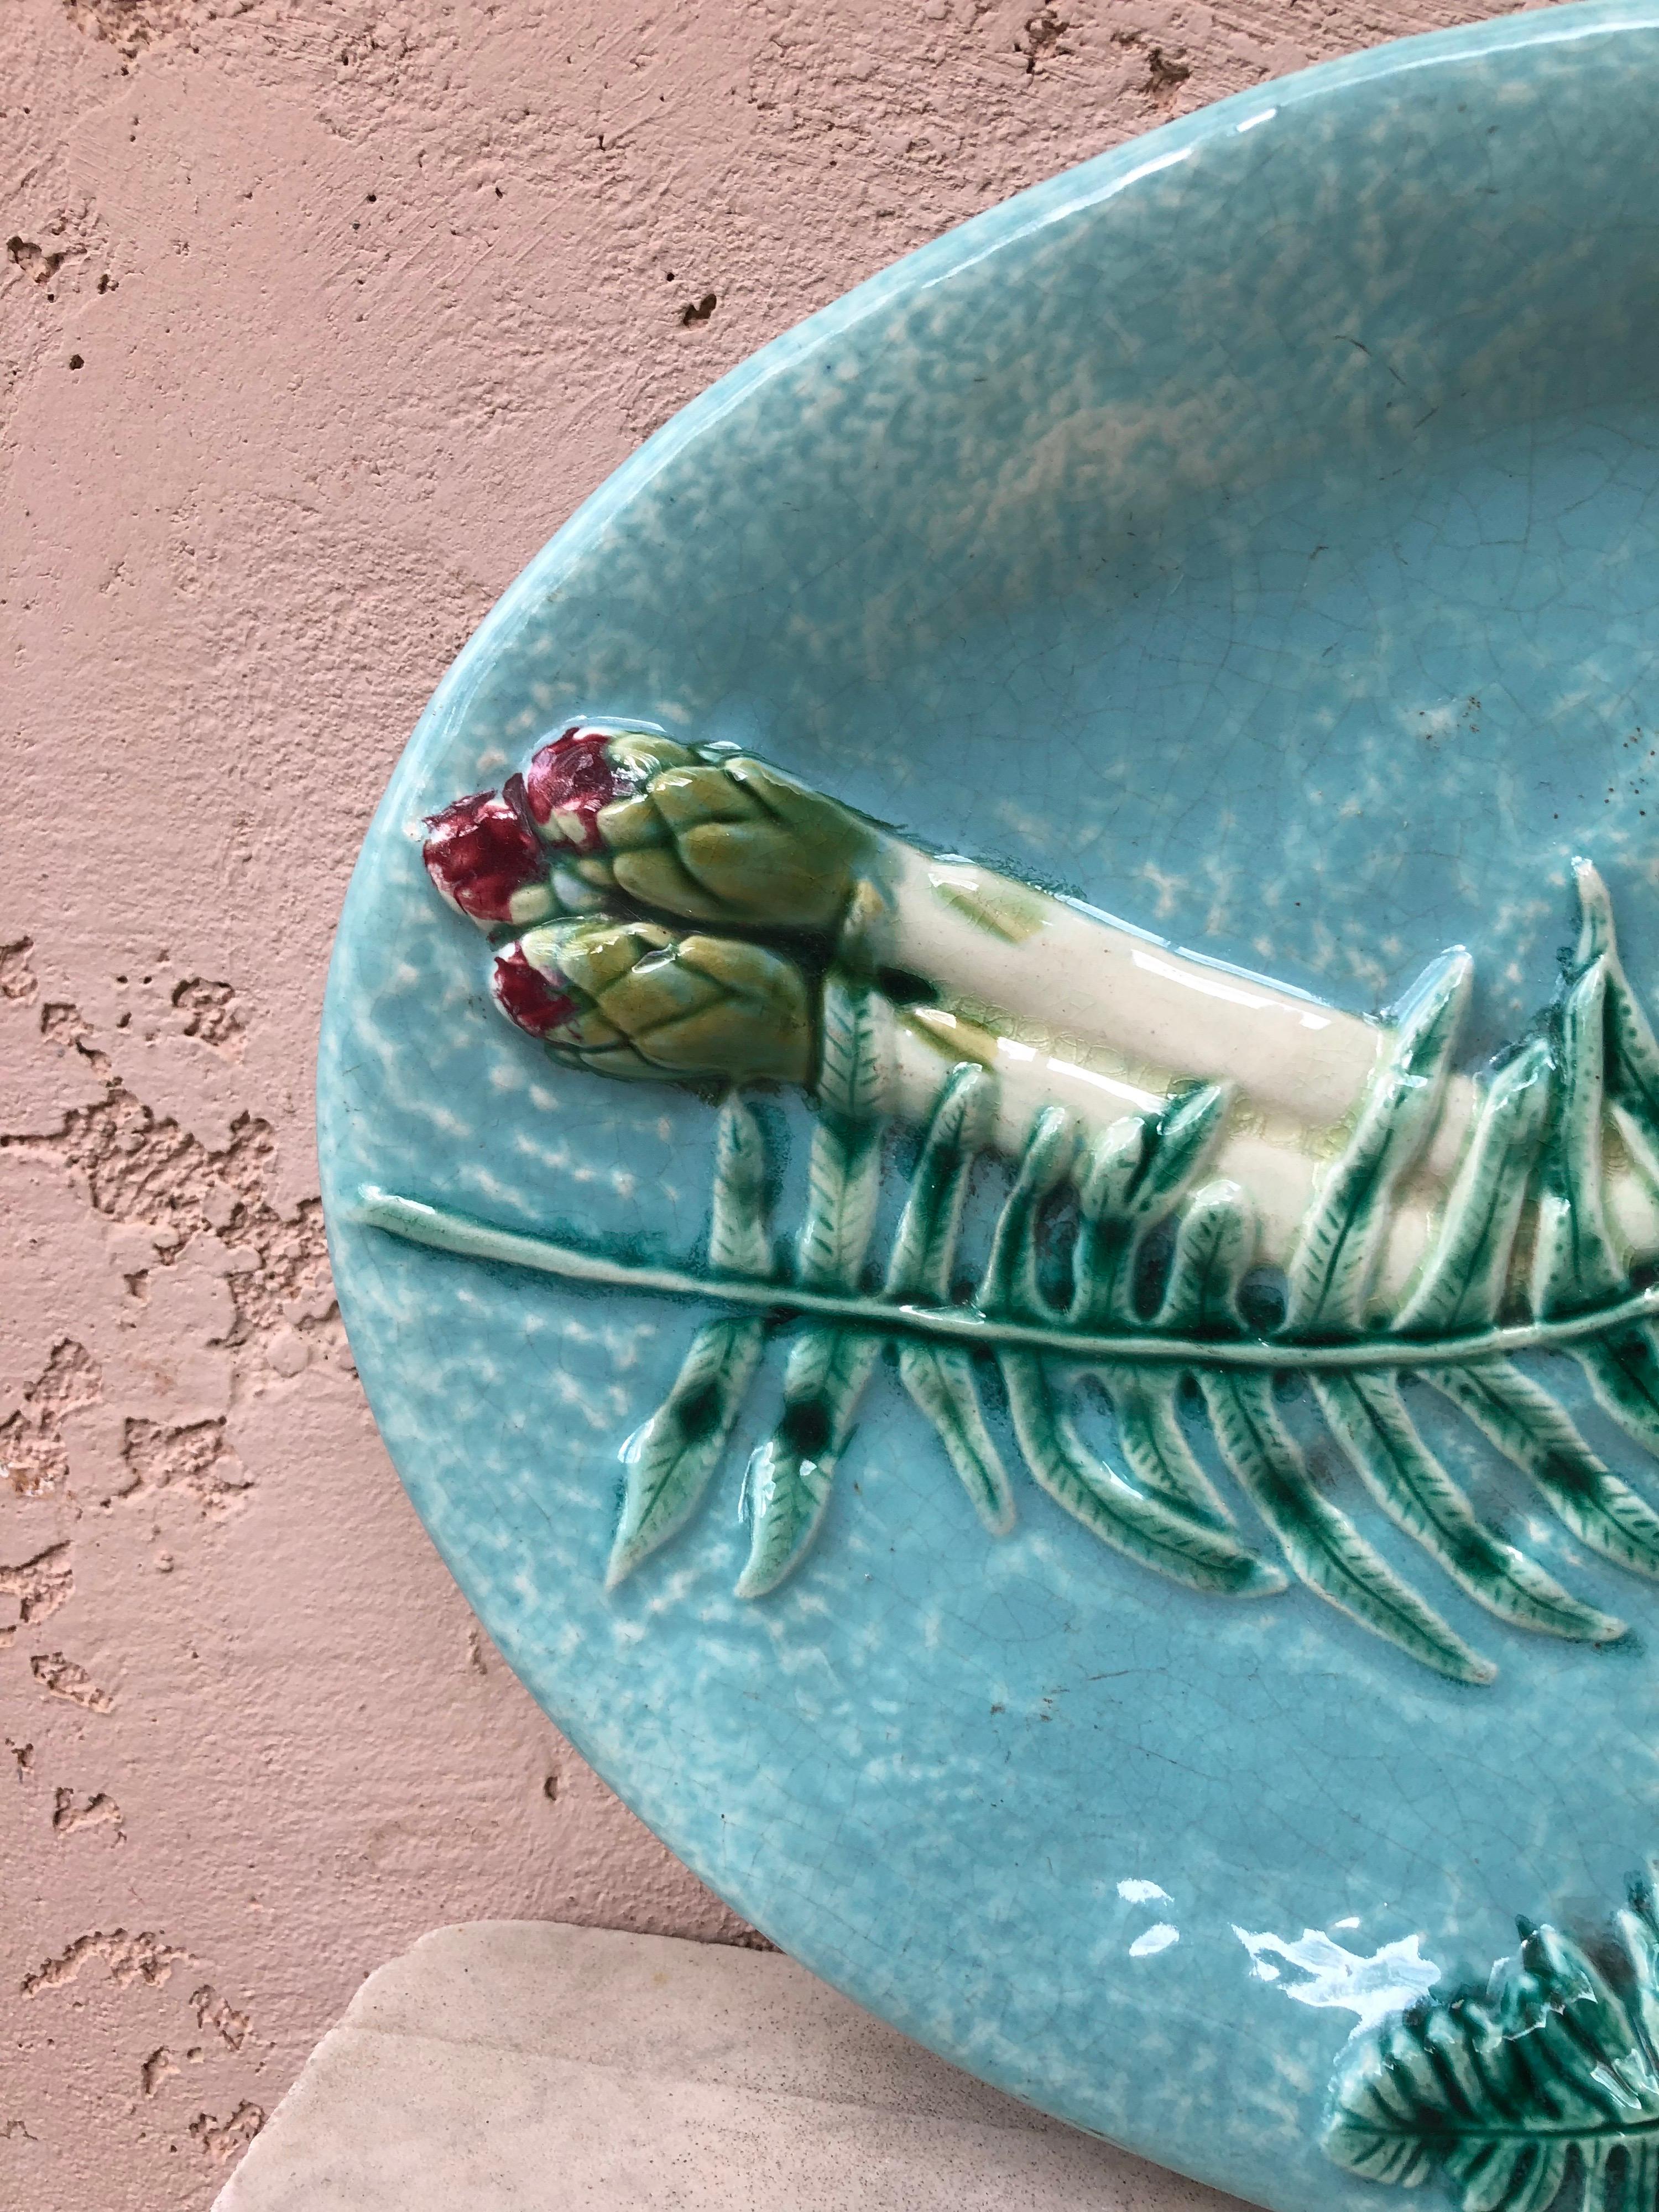 Rare Majolica Asparagus Platter with Fern Clairefontaine, circa 1880 For Sale 6